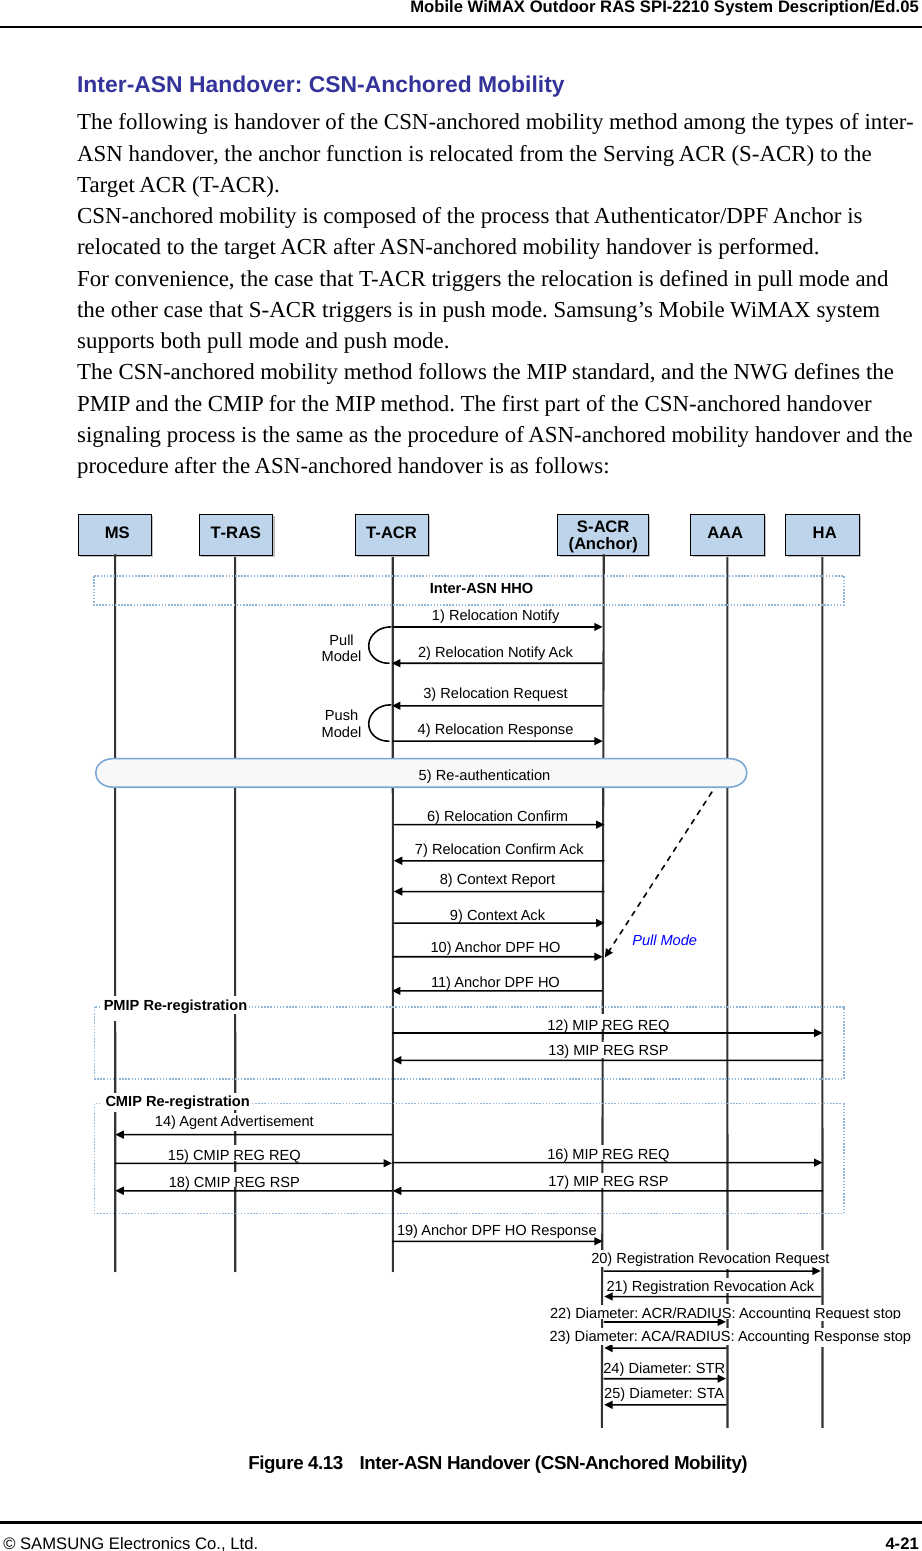   Mobile WiMAX Outdoor RAS SPI-2210 System Description/Ed.05 © SAMSUNG Electronics Co., Ltd.  4-21 Inter-ASN Handover: CSN-Anchored Mobility The following is handover of the CSN-anchored mobility method among the types of inter-ASN handover, the anchor function is relocated from the Serving ACR (S-ACR) to the Target ACR (T-ACR). CSN-anchored mobility is composed of the process that Authenticator/DPF Anchor is relocated to the target ACR after ASN-anchored mobility handover is performed.   For convenience, the case that T-ACR triggers the relocation is defined in pull mode and the other case that S-ACR triggers is in push mode. Samsung’s Mobile WiMAX system supports both pull mode and push mode. The CSN-anchored mobility method follows the MIP standard, and the NWG defines the PMIP and the CMIP for the MIP method. The first part of the CSN-anchored handover signaling process is the same as the procedure of ASN-anchored mobility handover and the procedure after the ASN-anchored handover is as follows:  Figure 4.13    Inter-ASN Handover (CSN-Anchored Mobility)   MS  S-ACR(Anchor)Inter-ASN HHO 1) Relocation Notify 2) Relocation Notify Ack3) Relocation Request4) Relocation ResponsePull Model Push Model 10) Anchor DPF HO 11) Anchor DPF HO 12) MIP REG REQ 13) MIP REG RSP 16) MIP REG REQ 17) MIP REG RSP 14) Agent Advertisement 15) CMIP REG REQ 18) CMIP REG RSP 19) Anchor DPF HO Response24) Diameter: STR 25) Diameter: STA Pull Mode 5) Re-authentication 21) Registration Revocation Ack 6) Relocation Confirm7) Relocation Confirm Ack 8) Context Report 9) Context Ack HA AAA 22) Diameter: ACR/RADIUS: Accounting Request stop23) Diameter: ACA/RADIUS: Accounting Response stop PMIP Re-registration CMIP Re-registration 20) Registration Revocation Request  T-RAS T-ACR